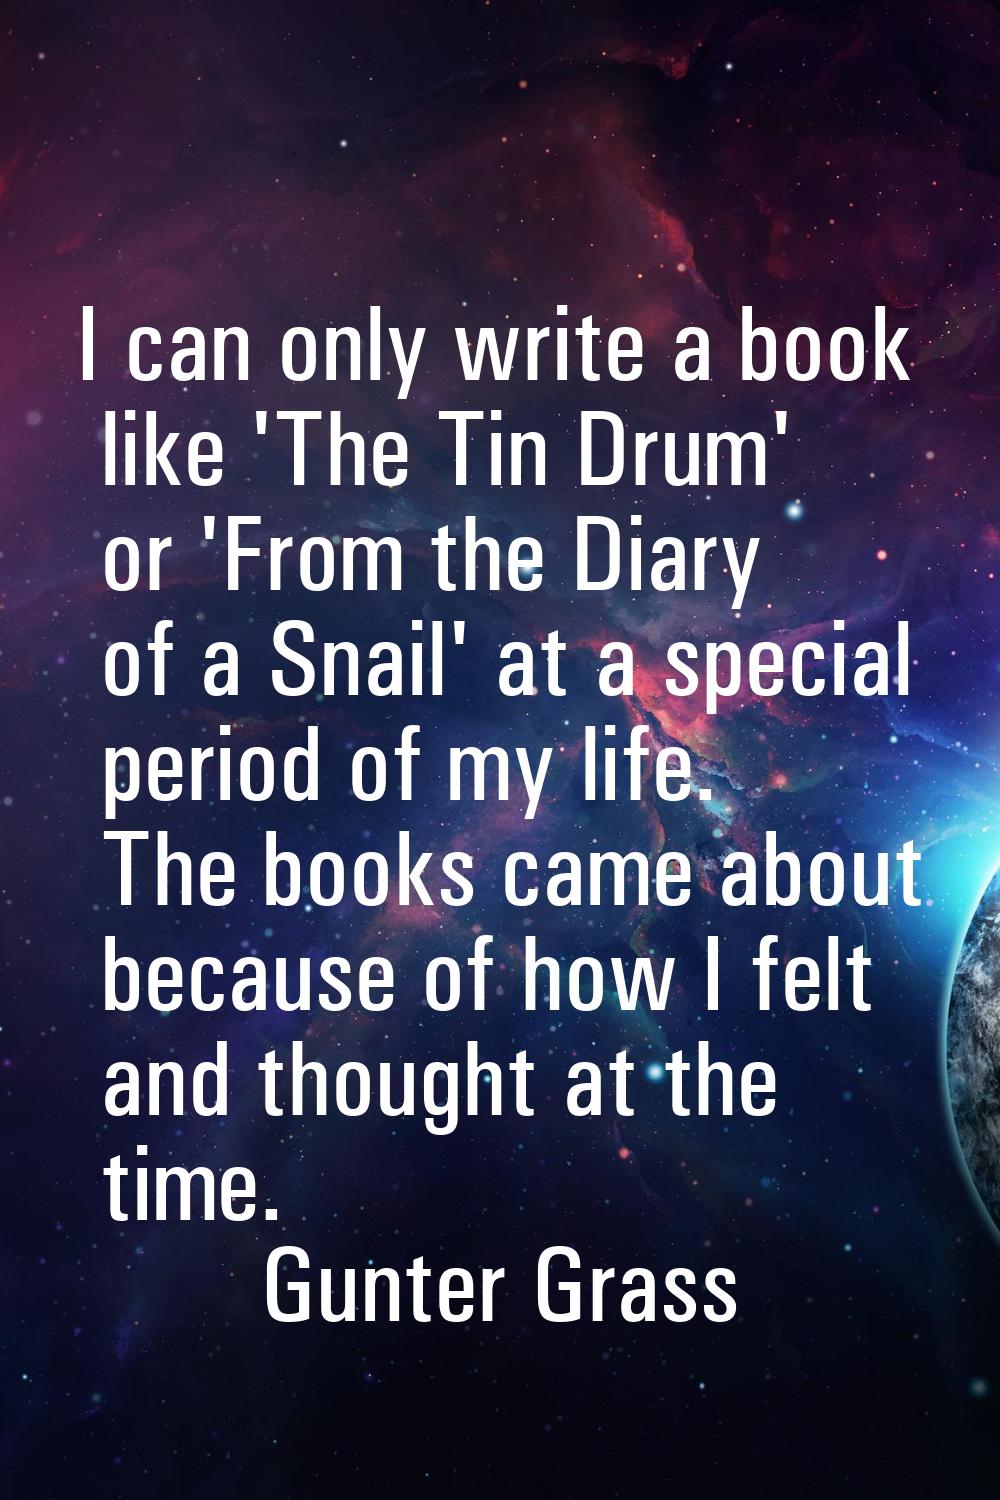 I can only write a book like 'The Tin Drum' or 'From the Diary of a Snail' at a special period of m